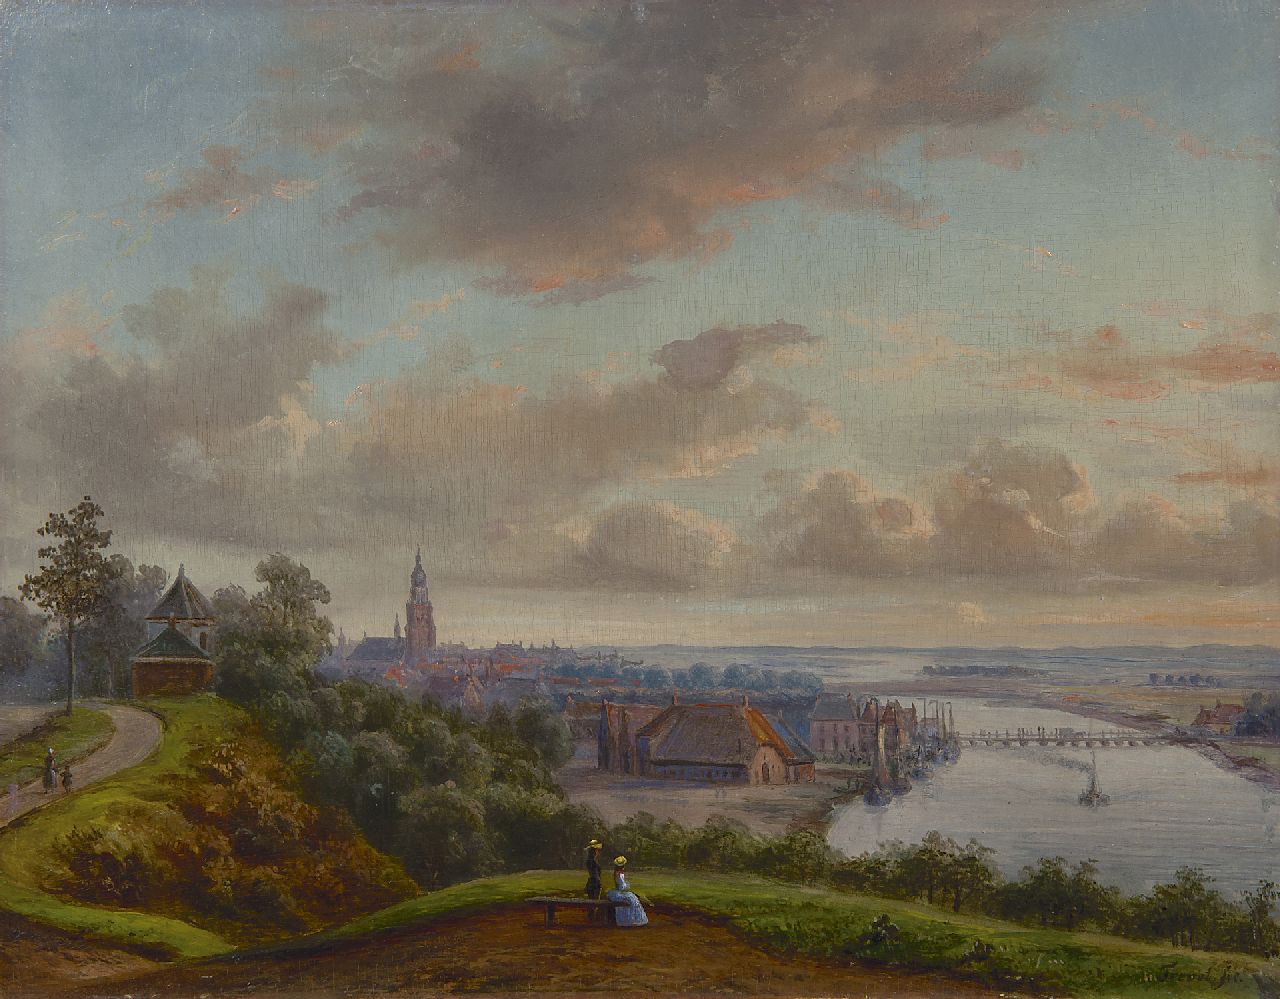 Troost W.  | Willem Troost, View on the Rhine and Arnhem from Bovenover, oil on panel 24.1 x 30.9 cm, signed l.r. and op basis van de topografie te dateren ca. 1840